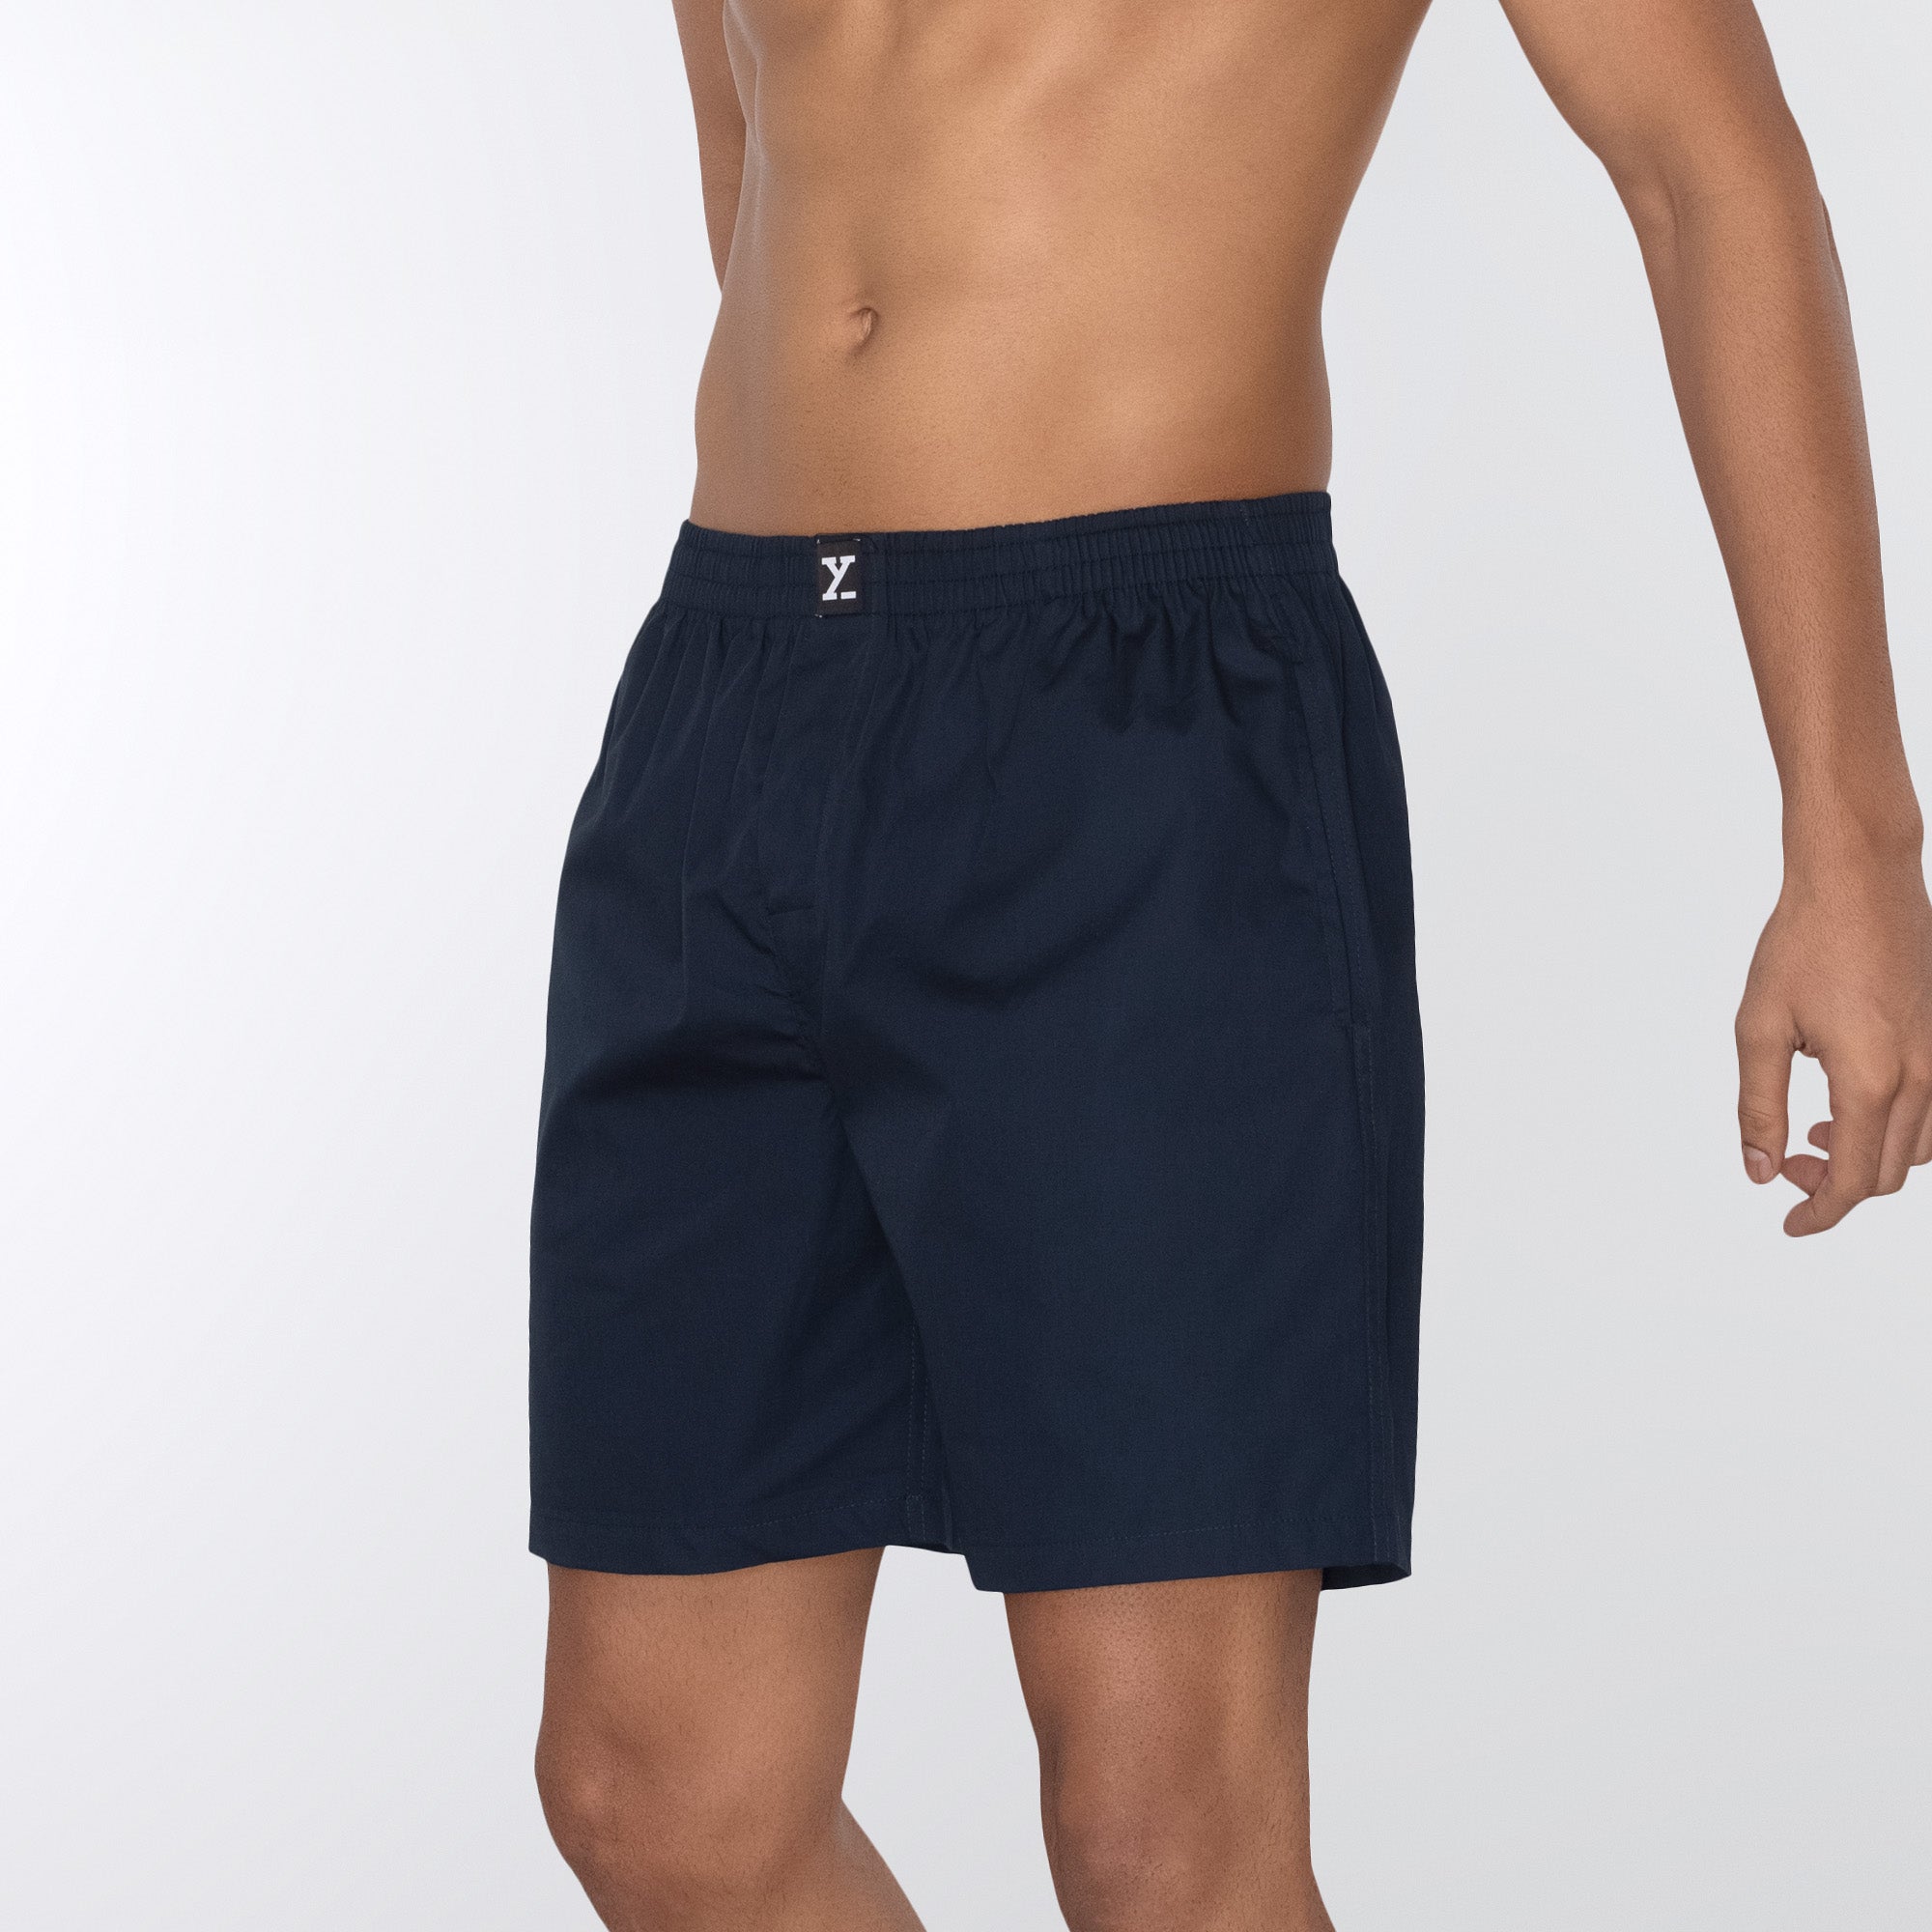 Pace Super Combed Cotton Boxer Shorts For Men Midnight Blue - XYXX Crew